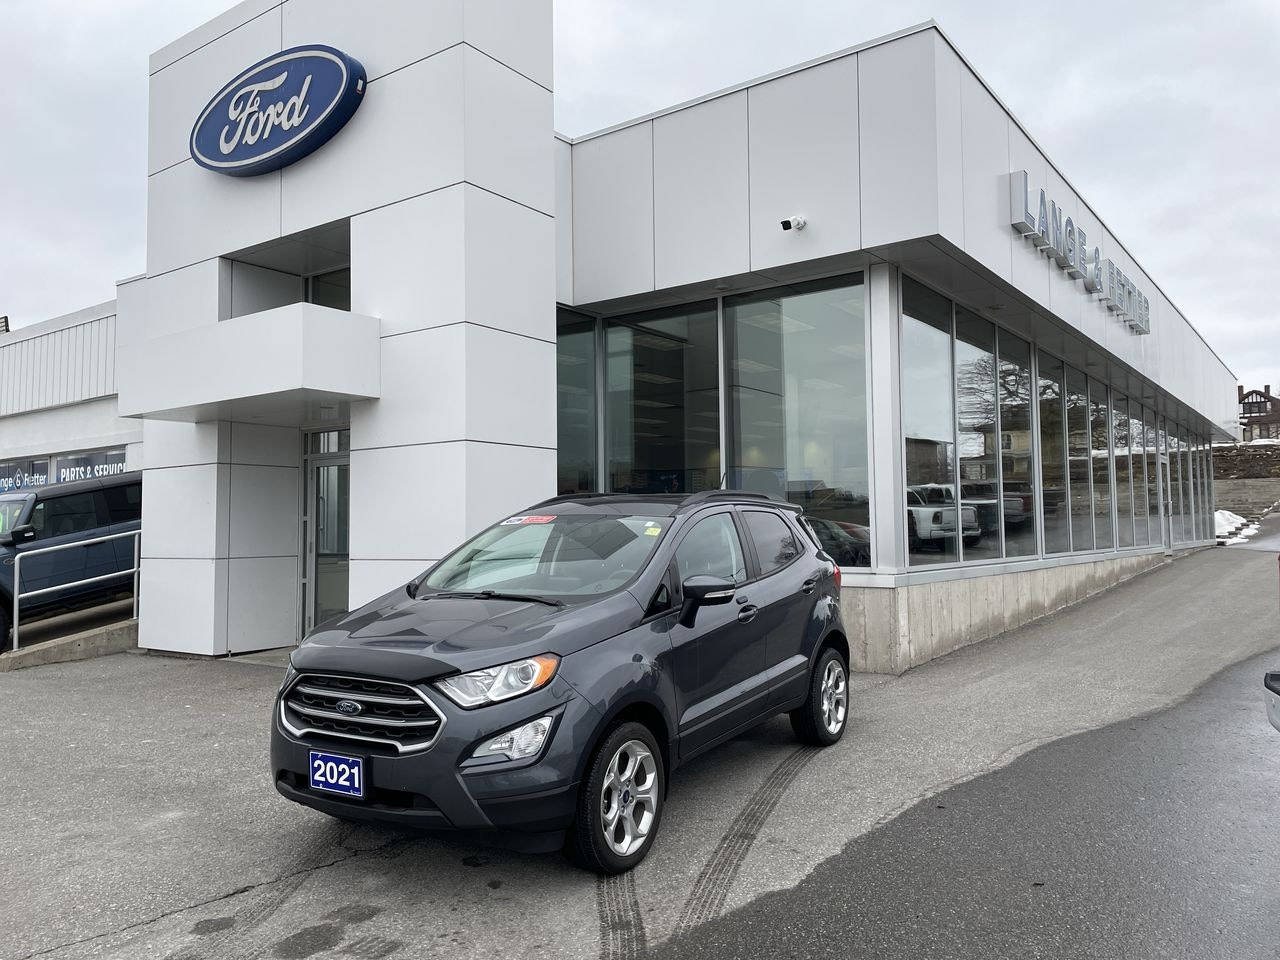 2021 Ford EcoSport - 21153A Full Image 1